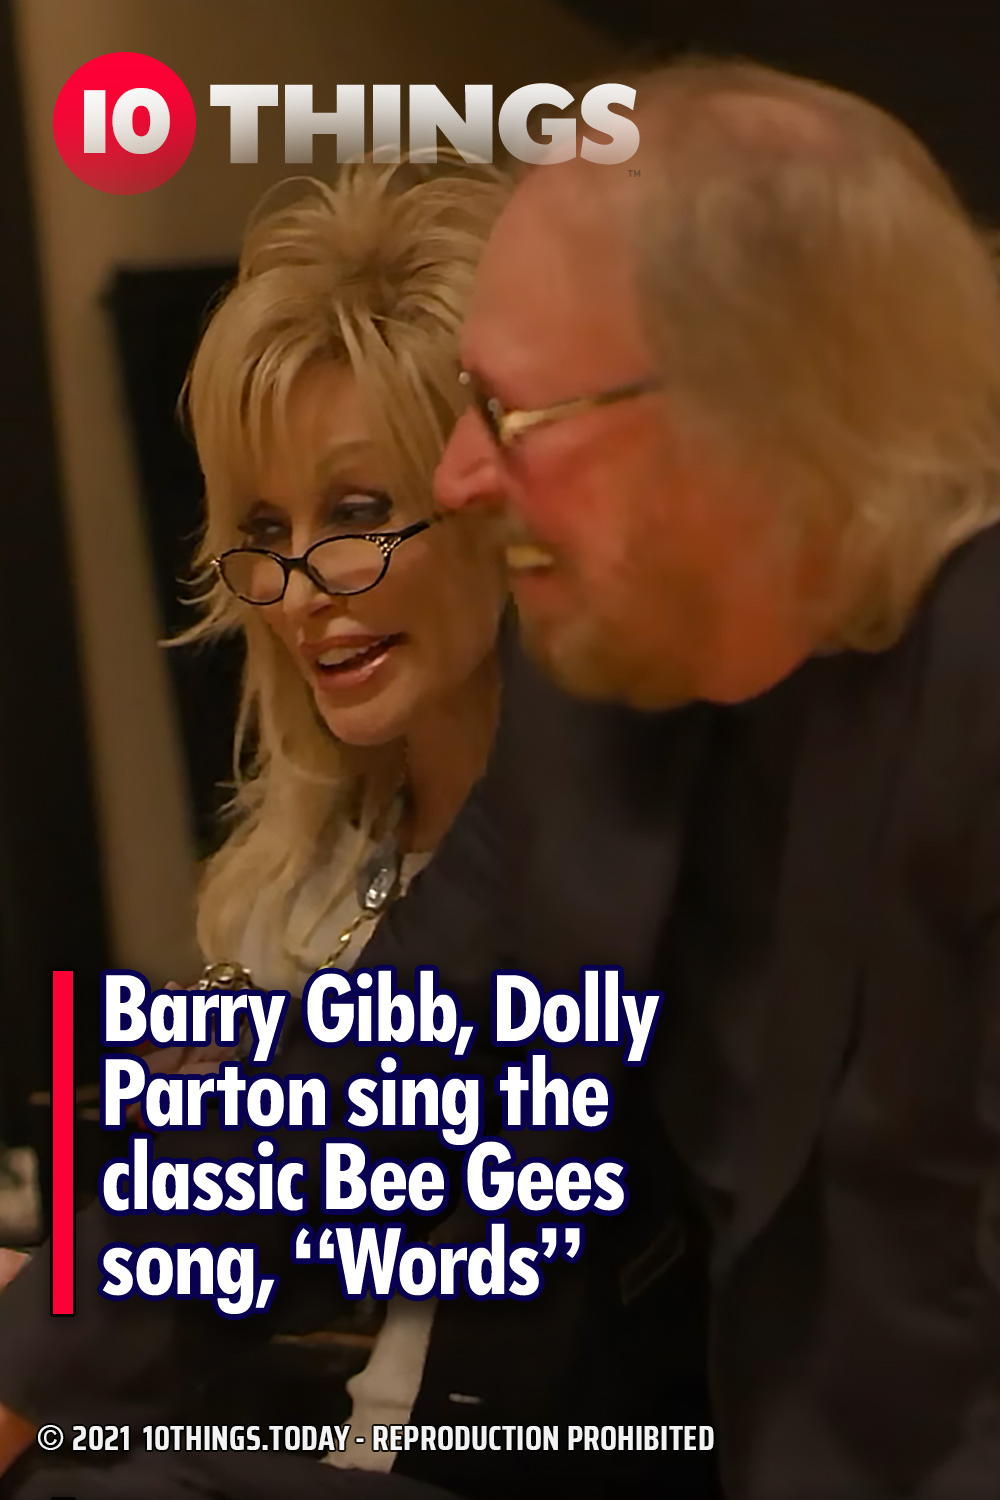 Barry Gibb, Dolly Parton sing the classic Bee Gees song, “Words”